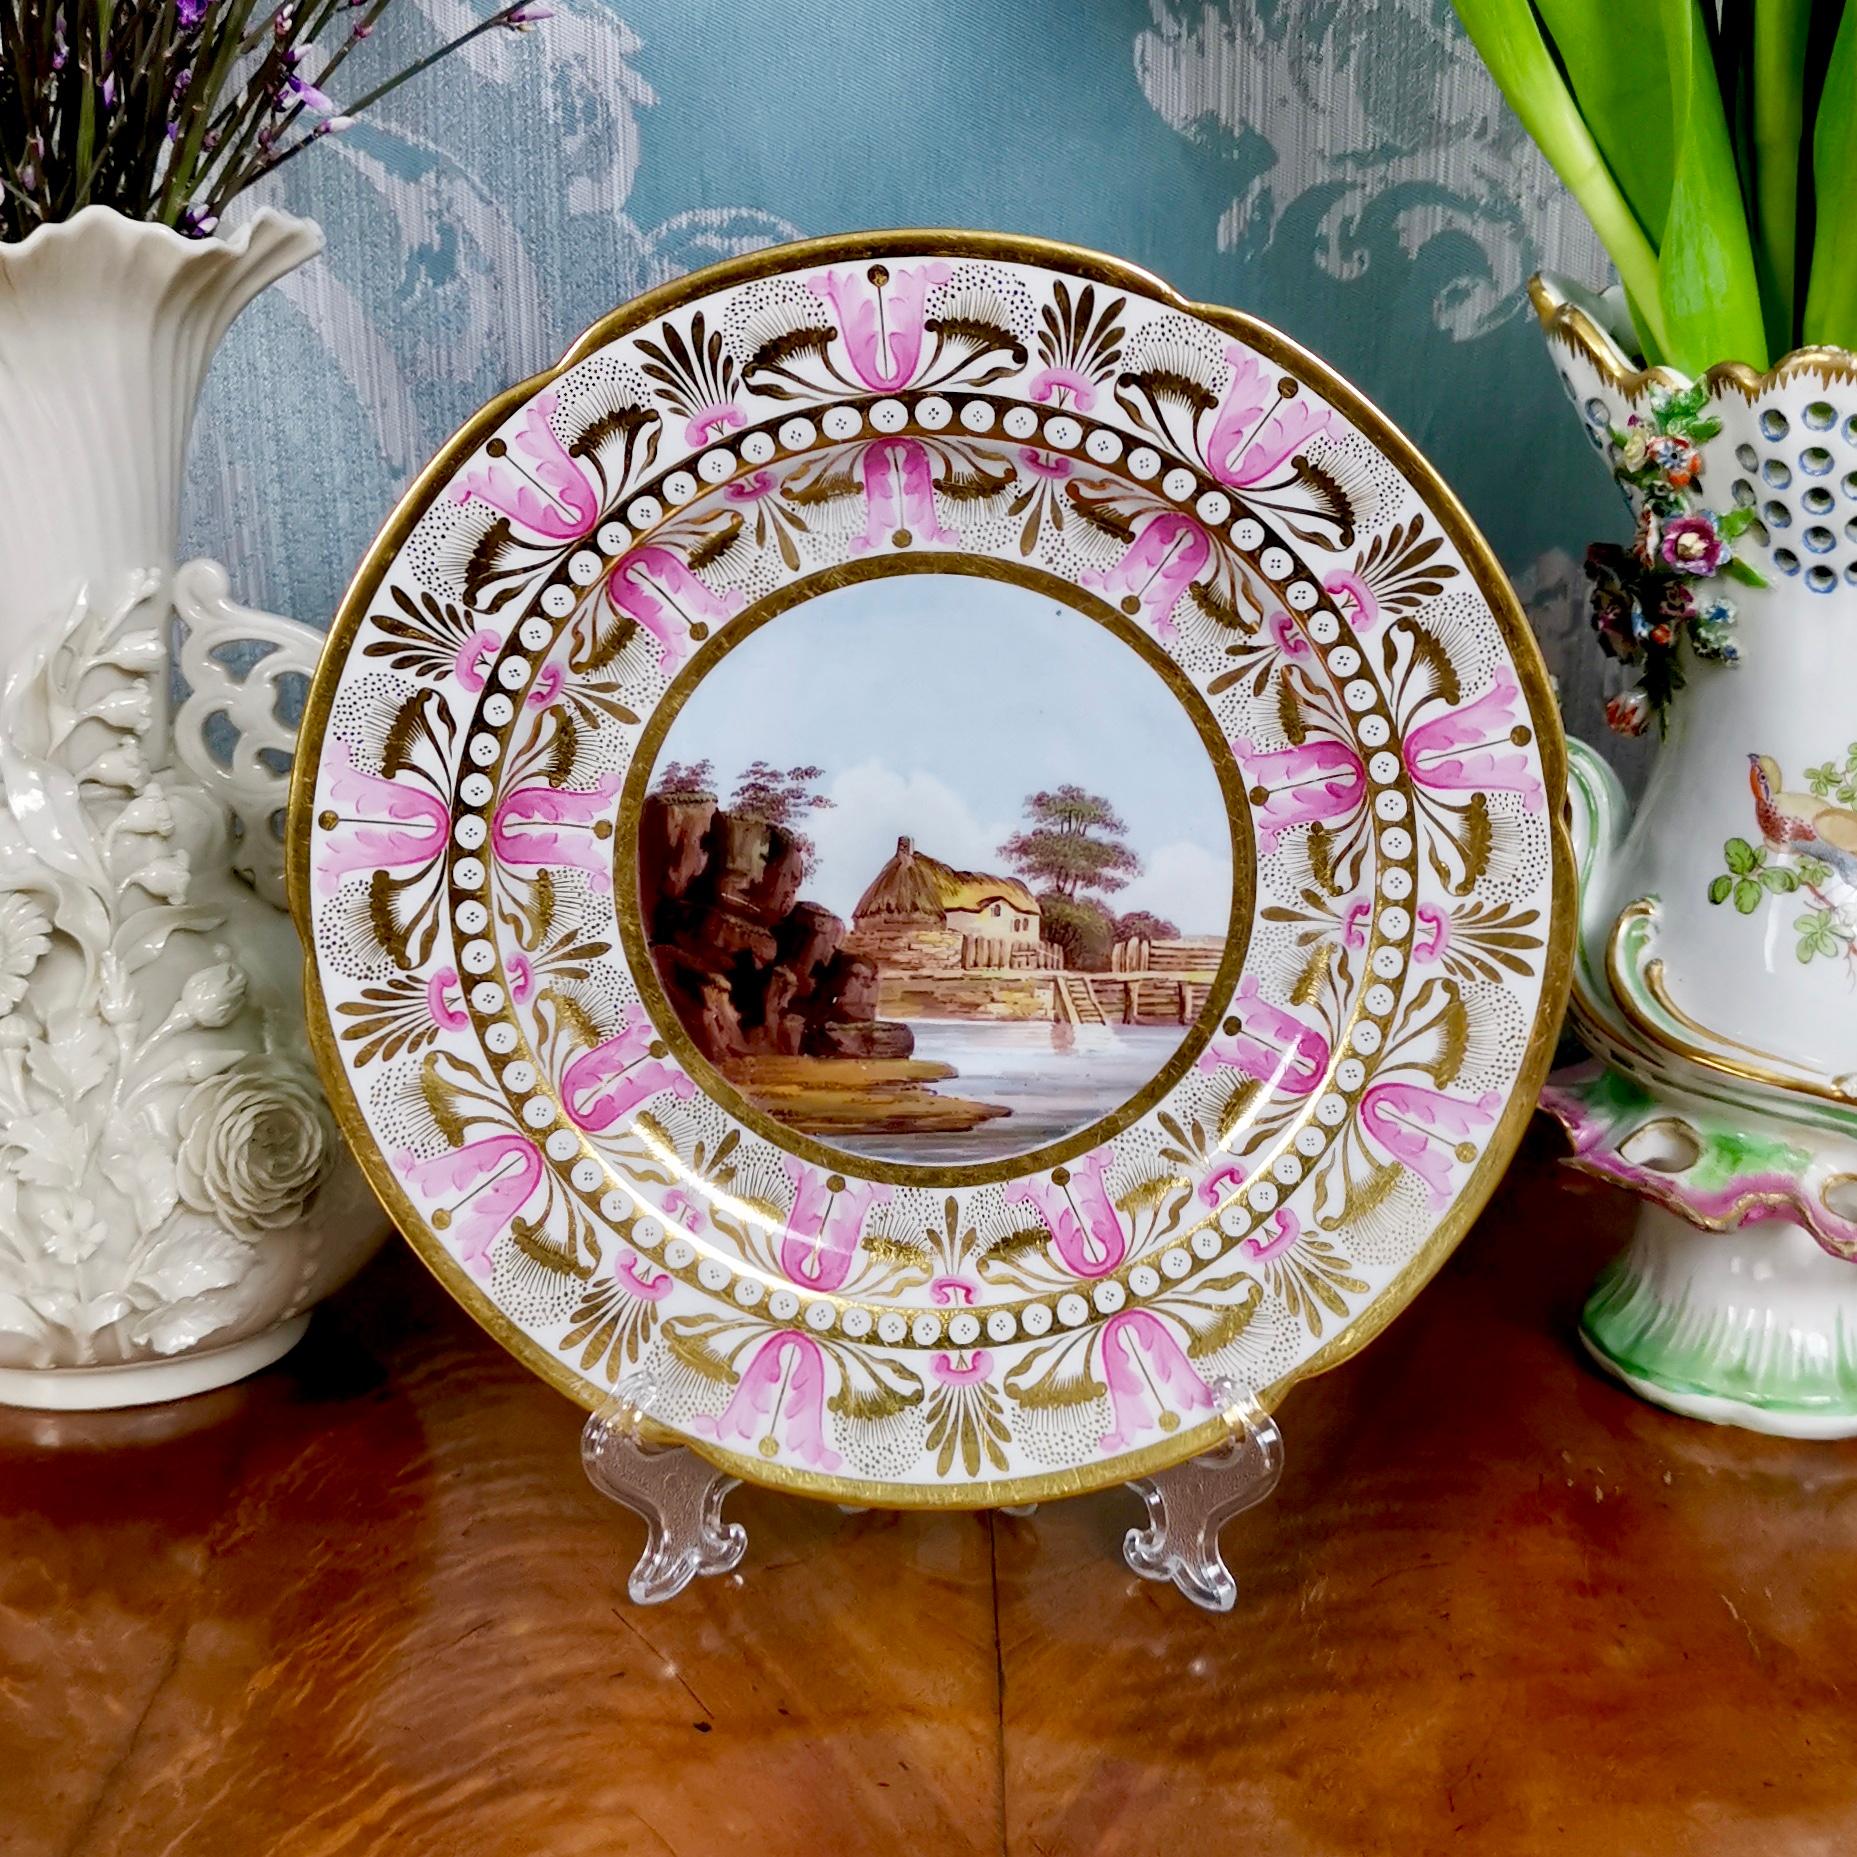 This is a spectacular small plate made by Flight Barr & Barr sometime between 1813 and 1825.

Flight Barr & Barr was the continuation of the famous Worcester Porcelain Company. The factory went through various partnerships before being turned into